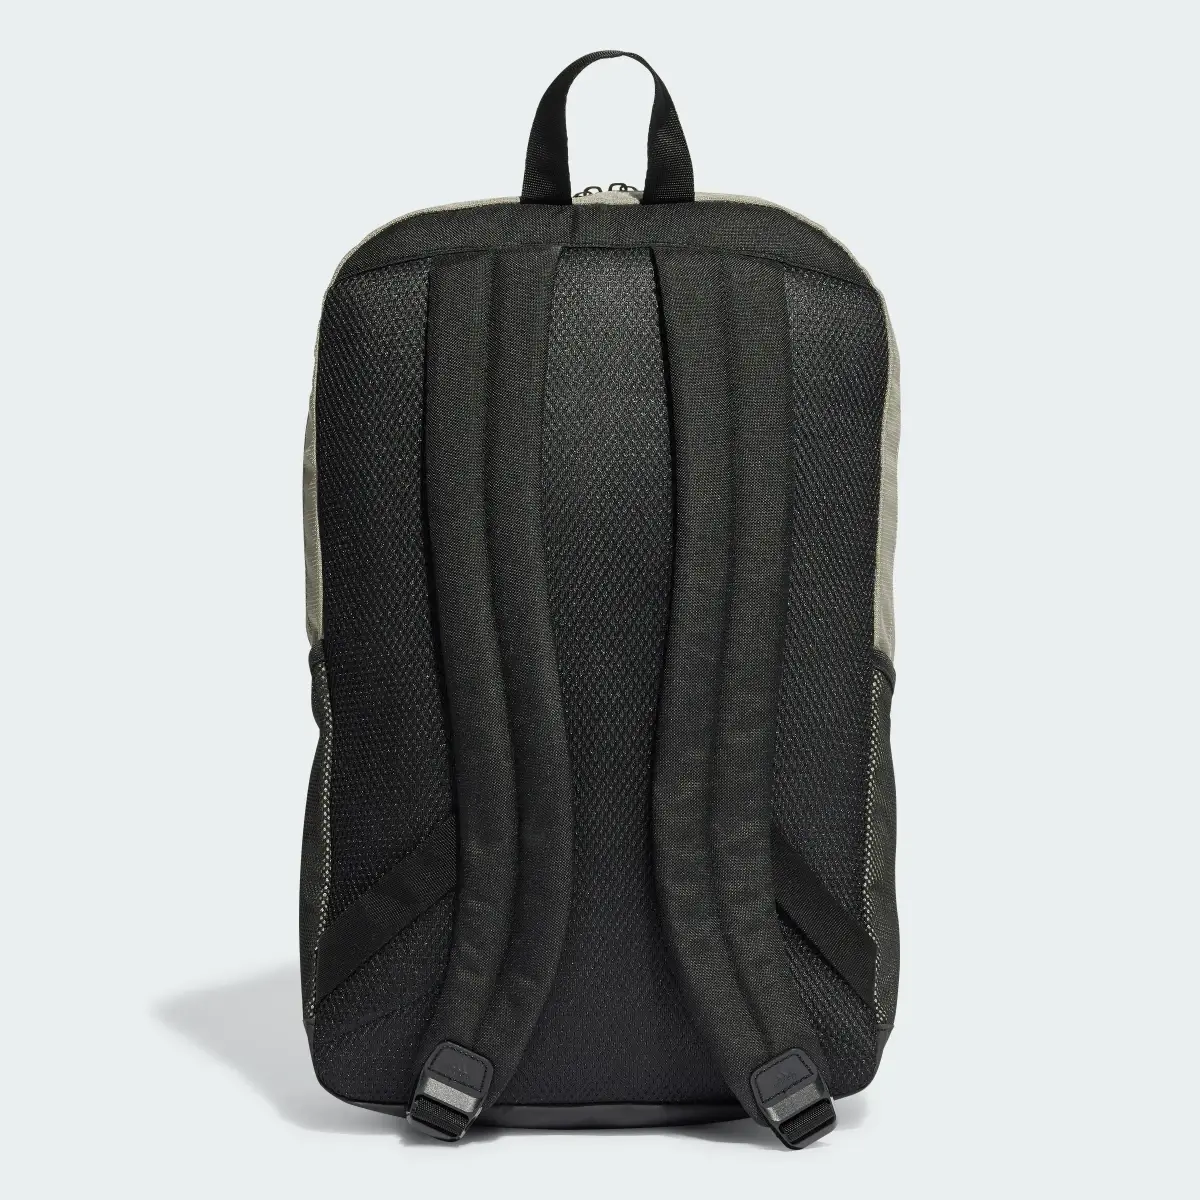 Adidas Motion 3-Stripes Backpack. 3